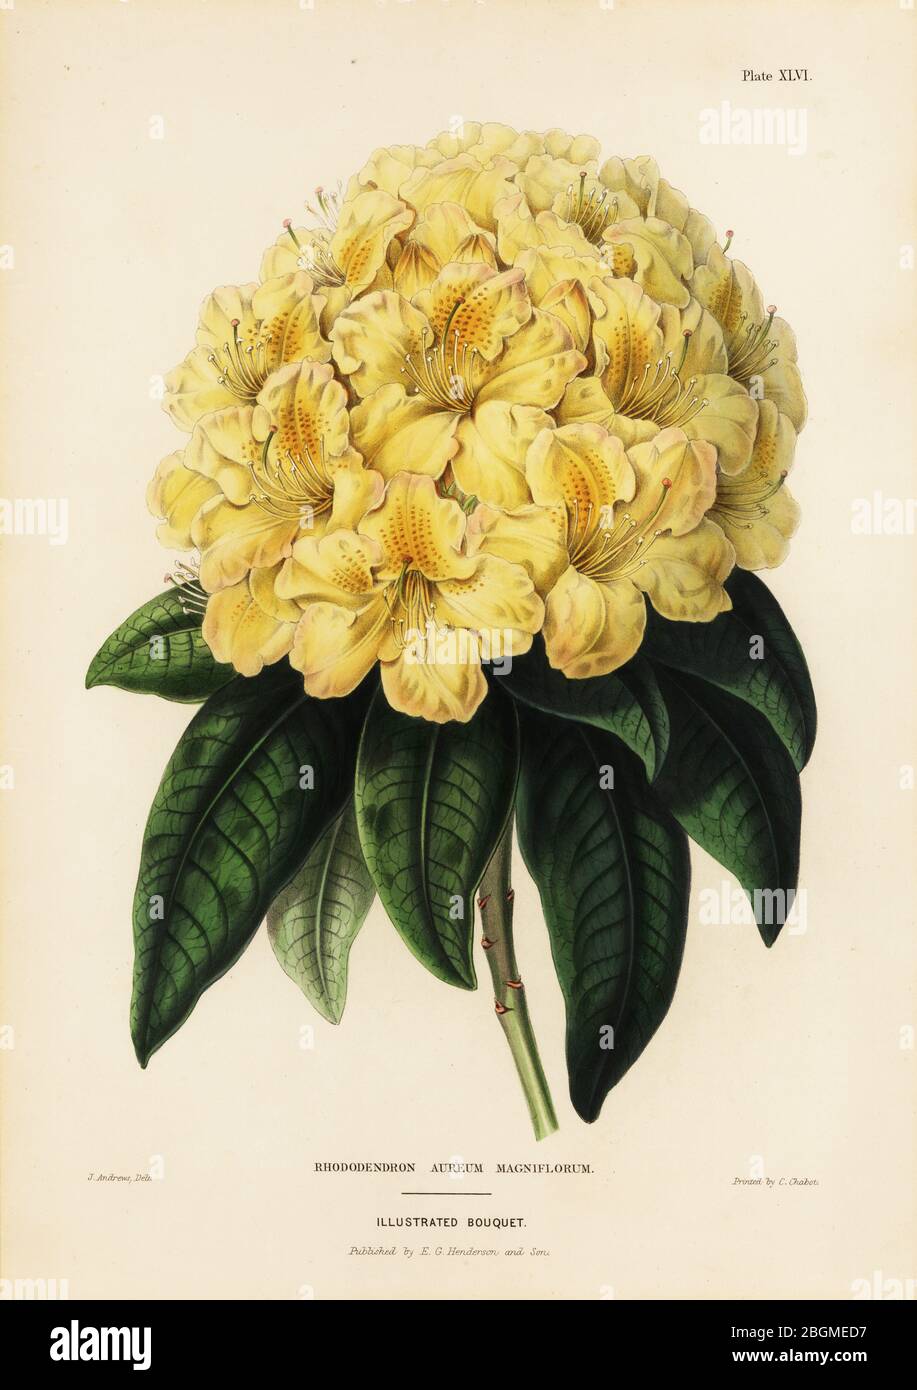 Golden rhododendron, Rhodendron aureum magniflorum. Handcoloured copperplate engraving by James Andrews from Edward Henderson and Andrew Henderson’s The Illustrated Bouquet, consisting of figures with descriptions of new flowers, printed by C. Chabot, E.G. Henderon, London, 1857. Stock Photo